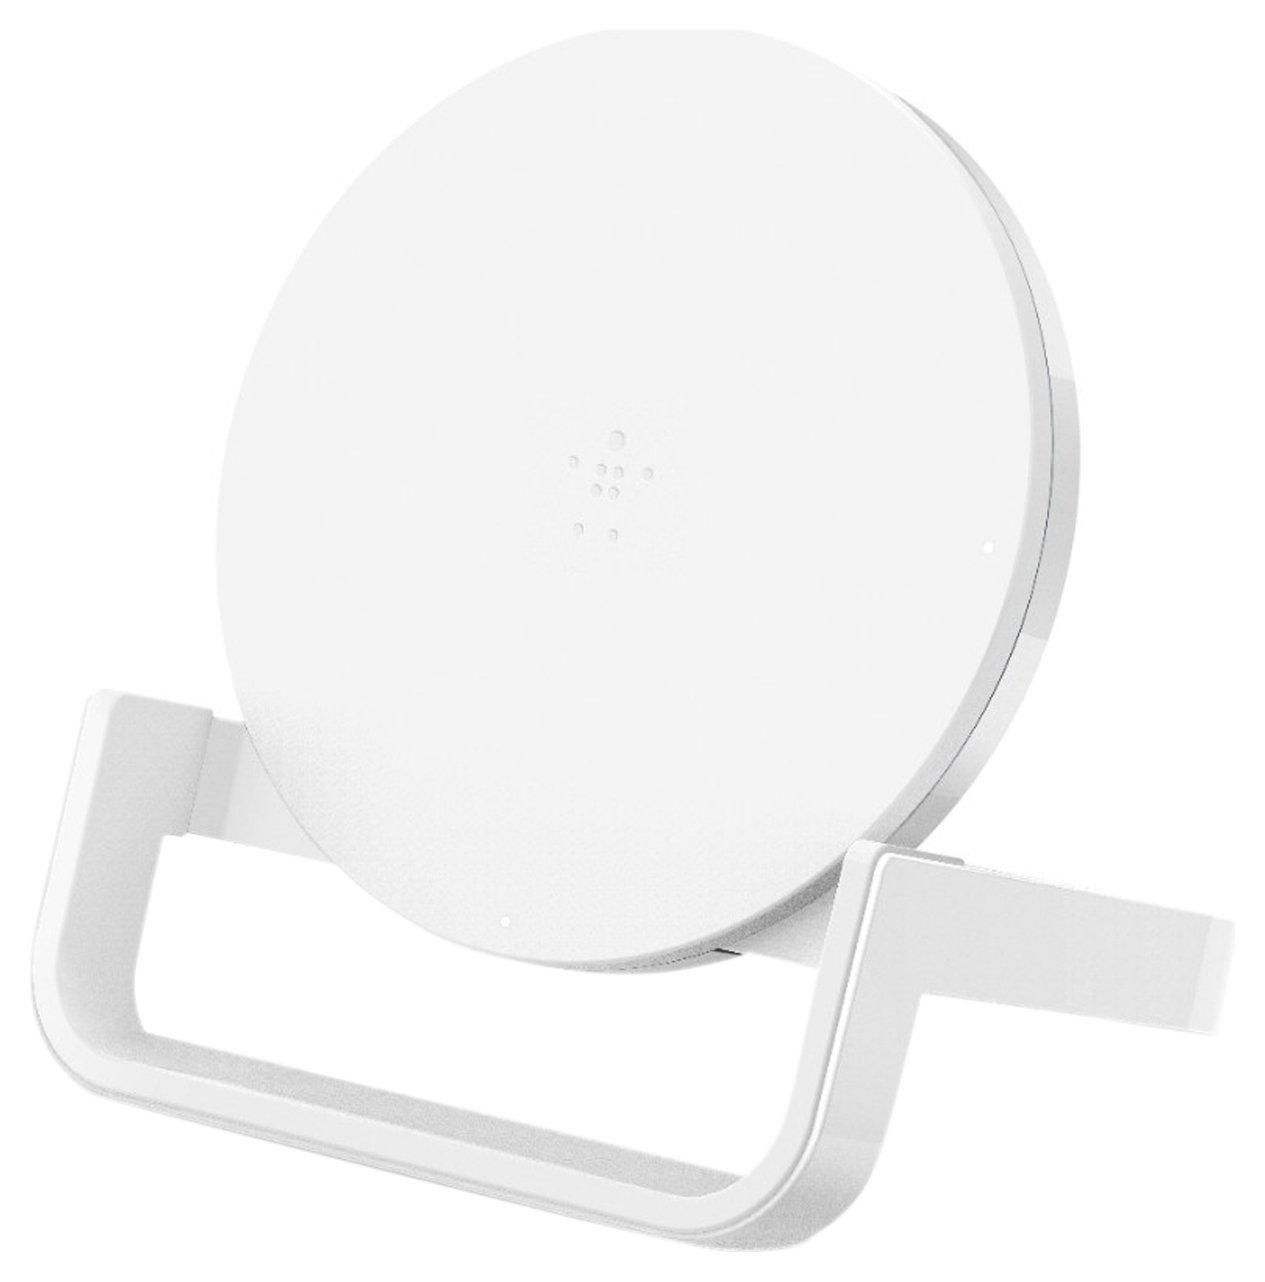 Belkin Qi Enabled 10W Wireless Charge Stand - White